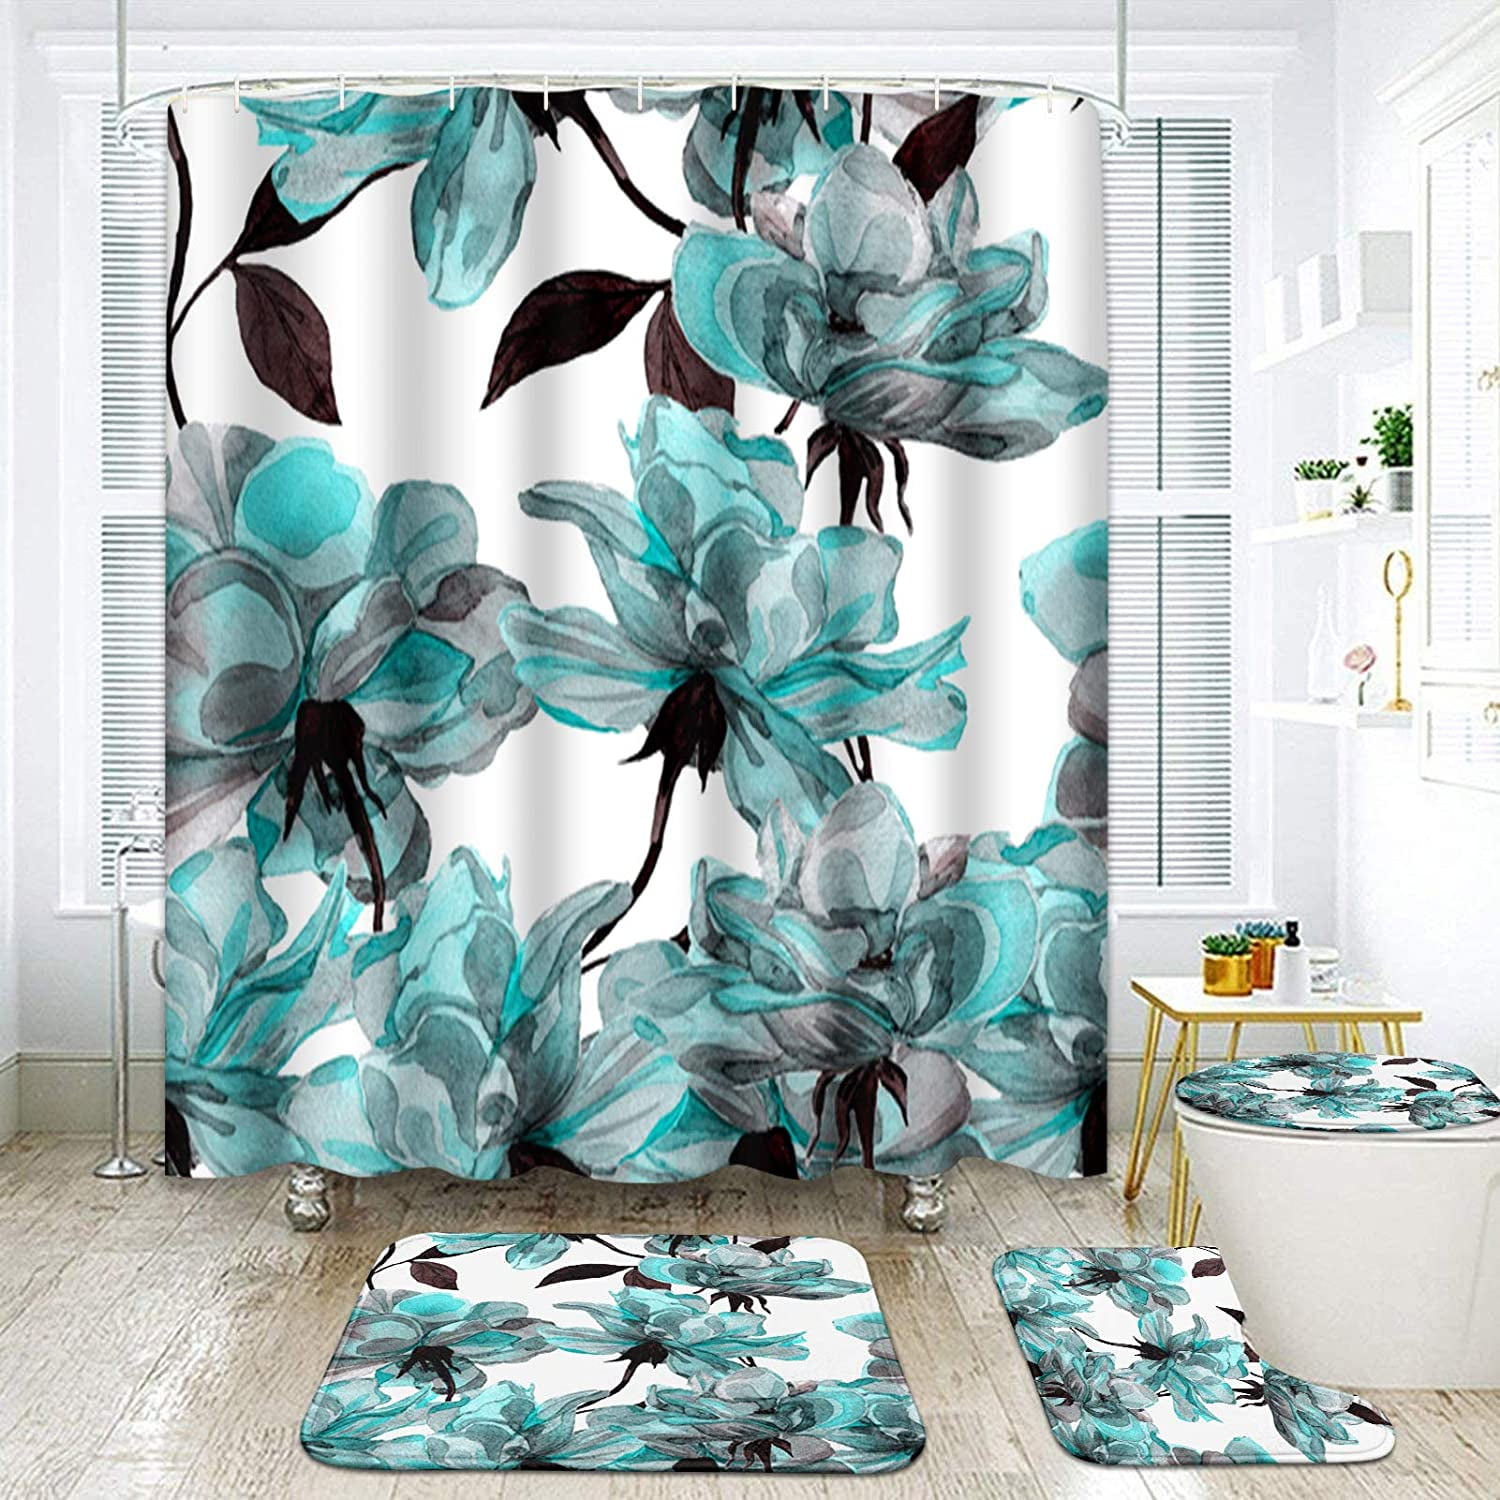 Details about   Butterfly Rose Bathroom Rug Anti-Slip Shower Curtain Bath Toilet Lid Cover Mat 